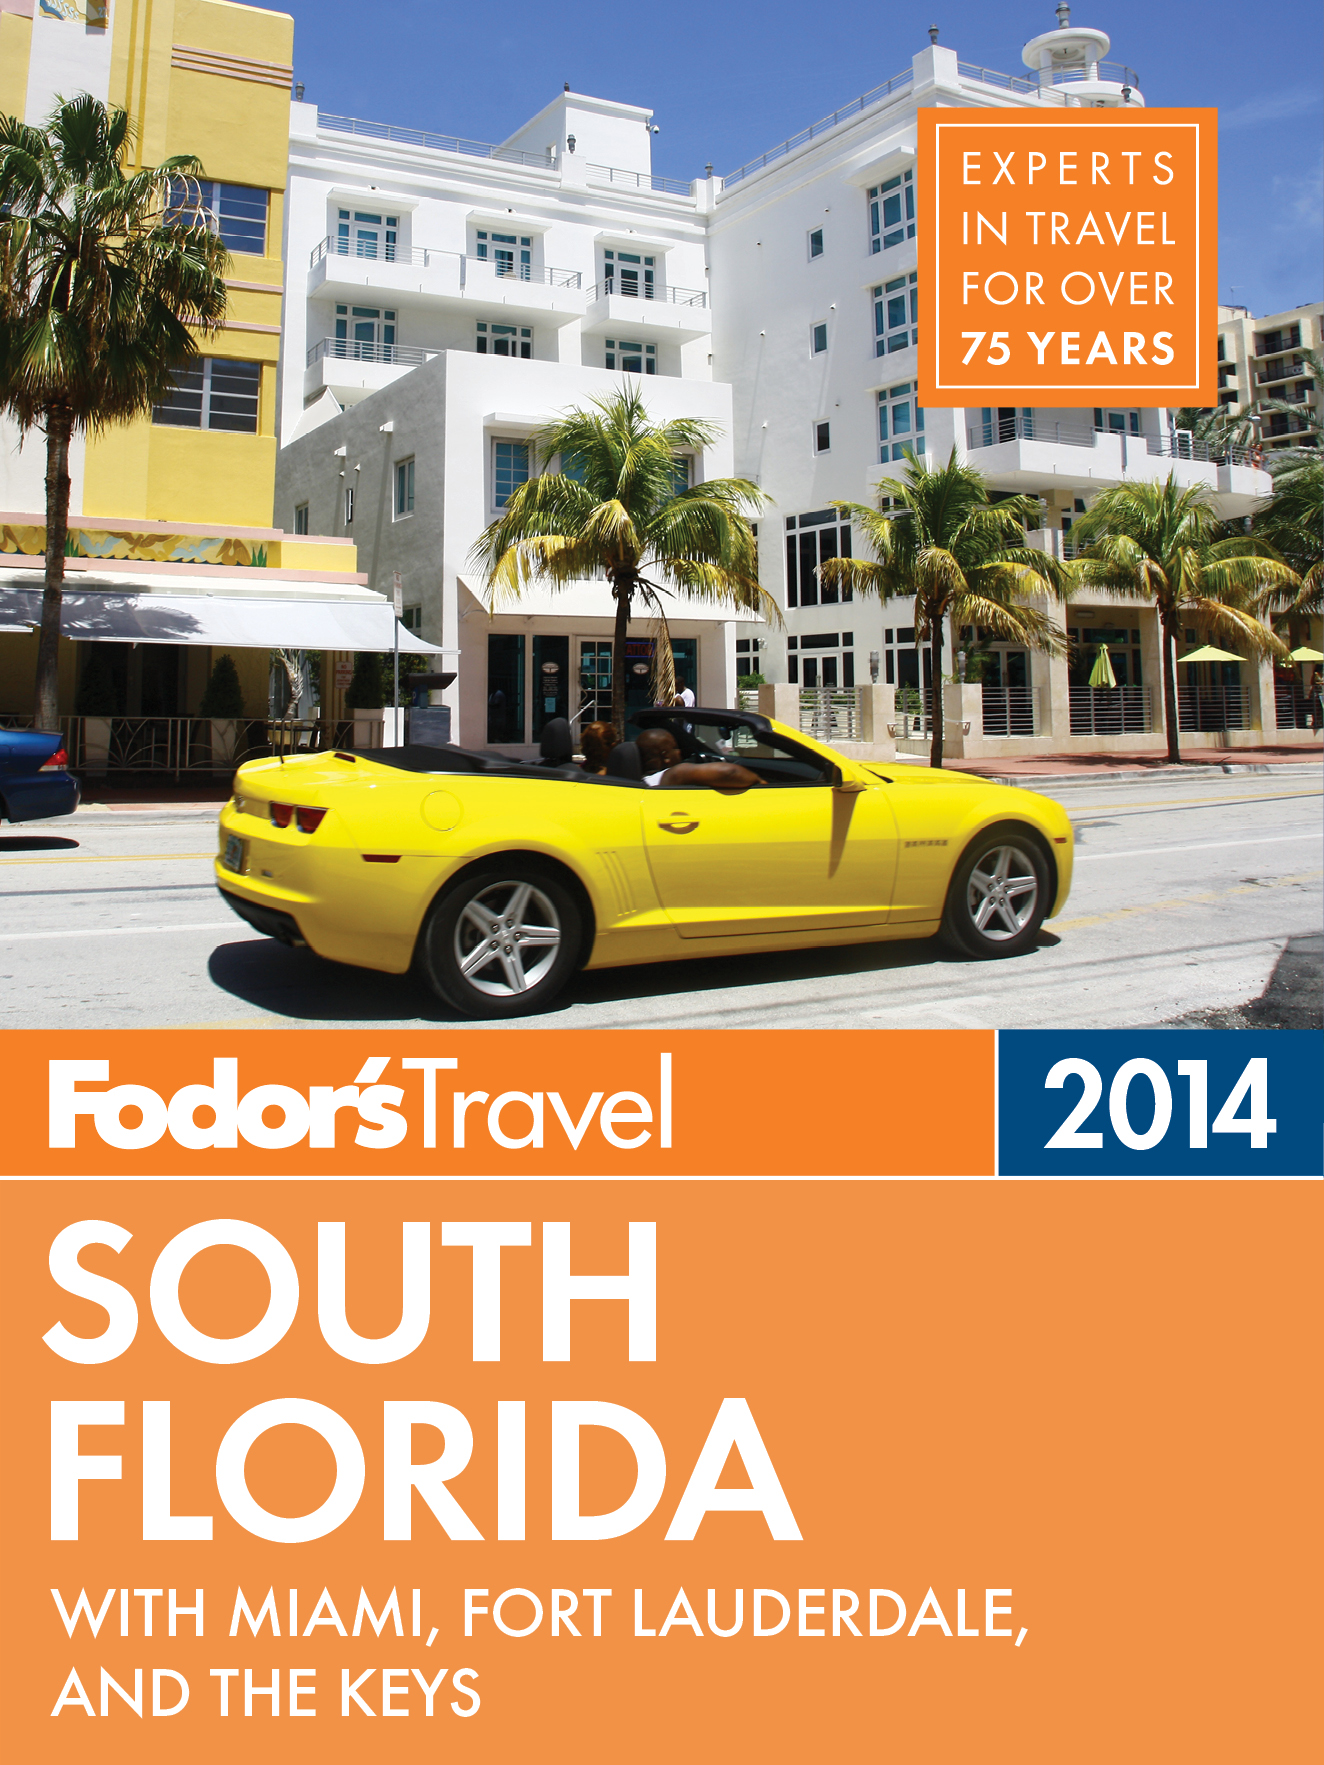 Fodors South Florida 2014 with Miami Fort Lauderdale and the Keys - photo 1